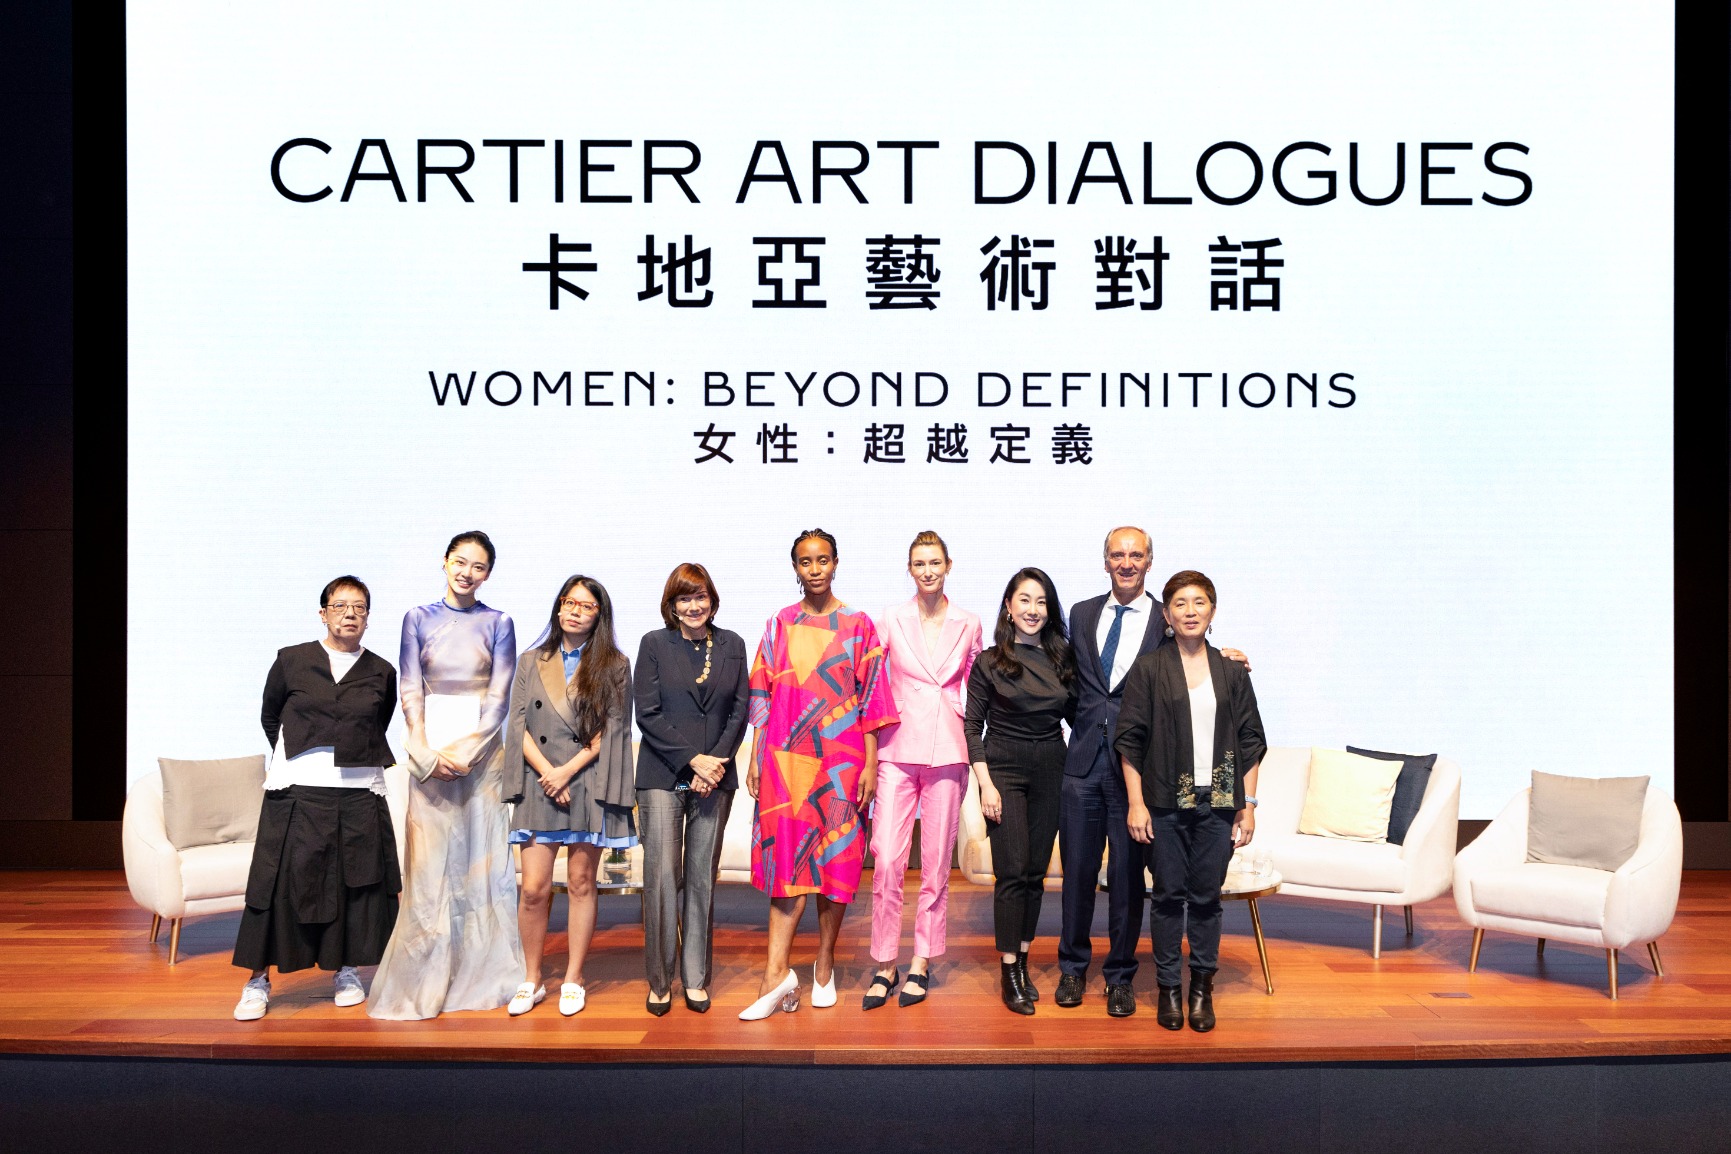 Group photo of some participants from the panel discussions standing on stage. The colours are pink, black, white and other warm tones.